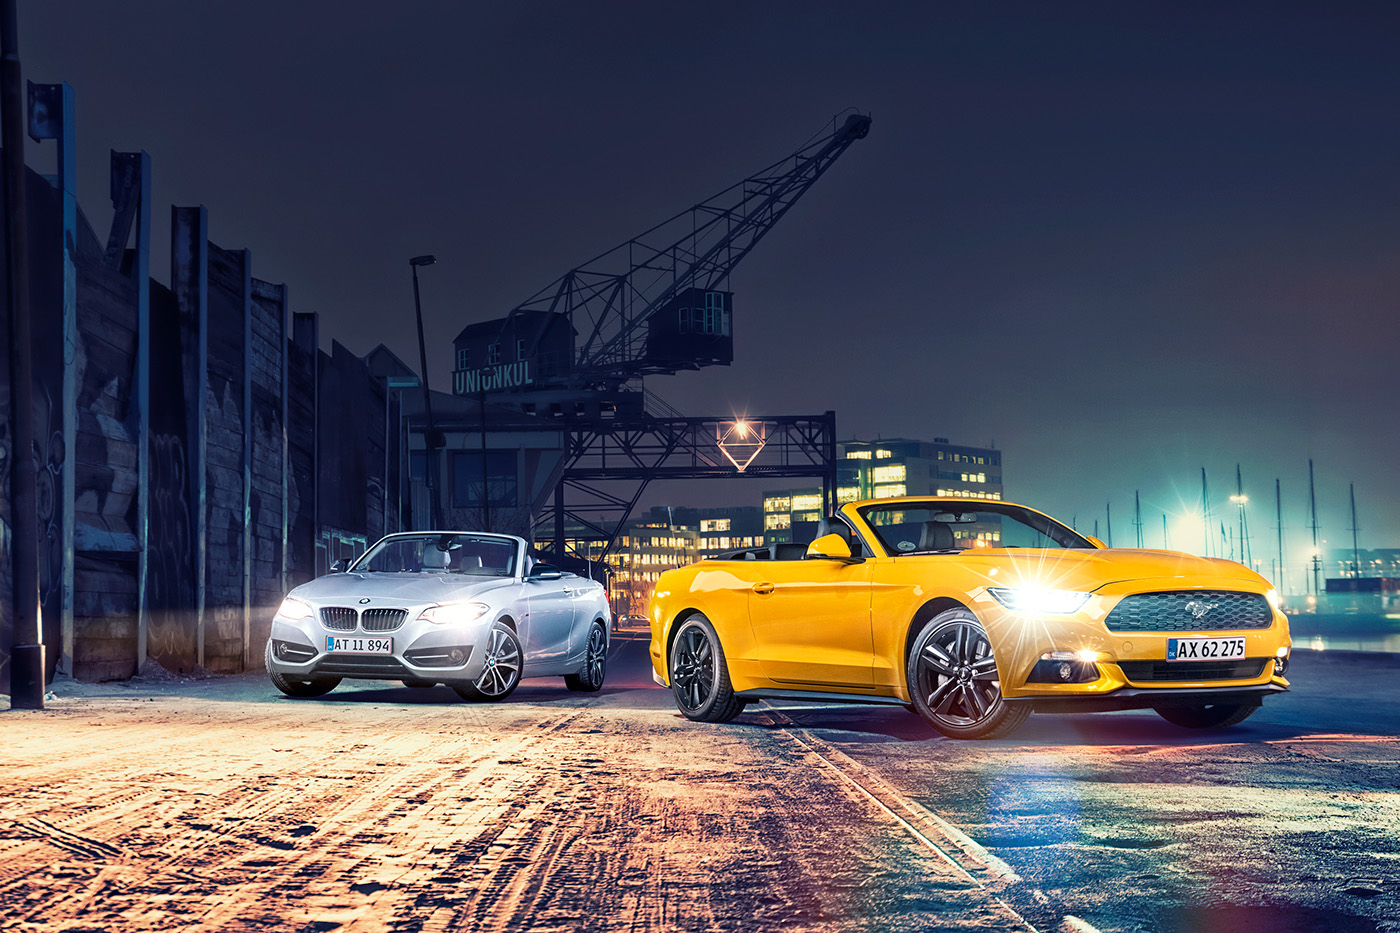 Cars mikael wilken wilken retouch mercedes AMG Mercedes AMG car magazine Ford Ford Mustang BMW opel VW Professionel image editing color grading retouch